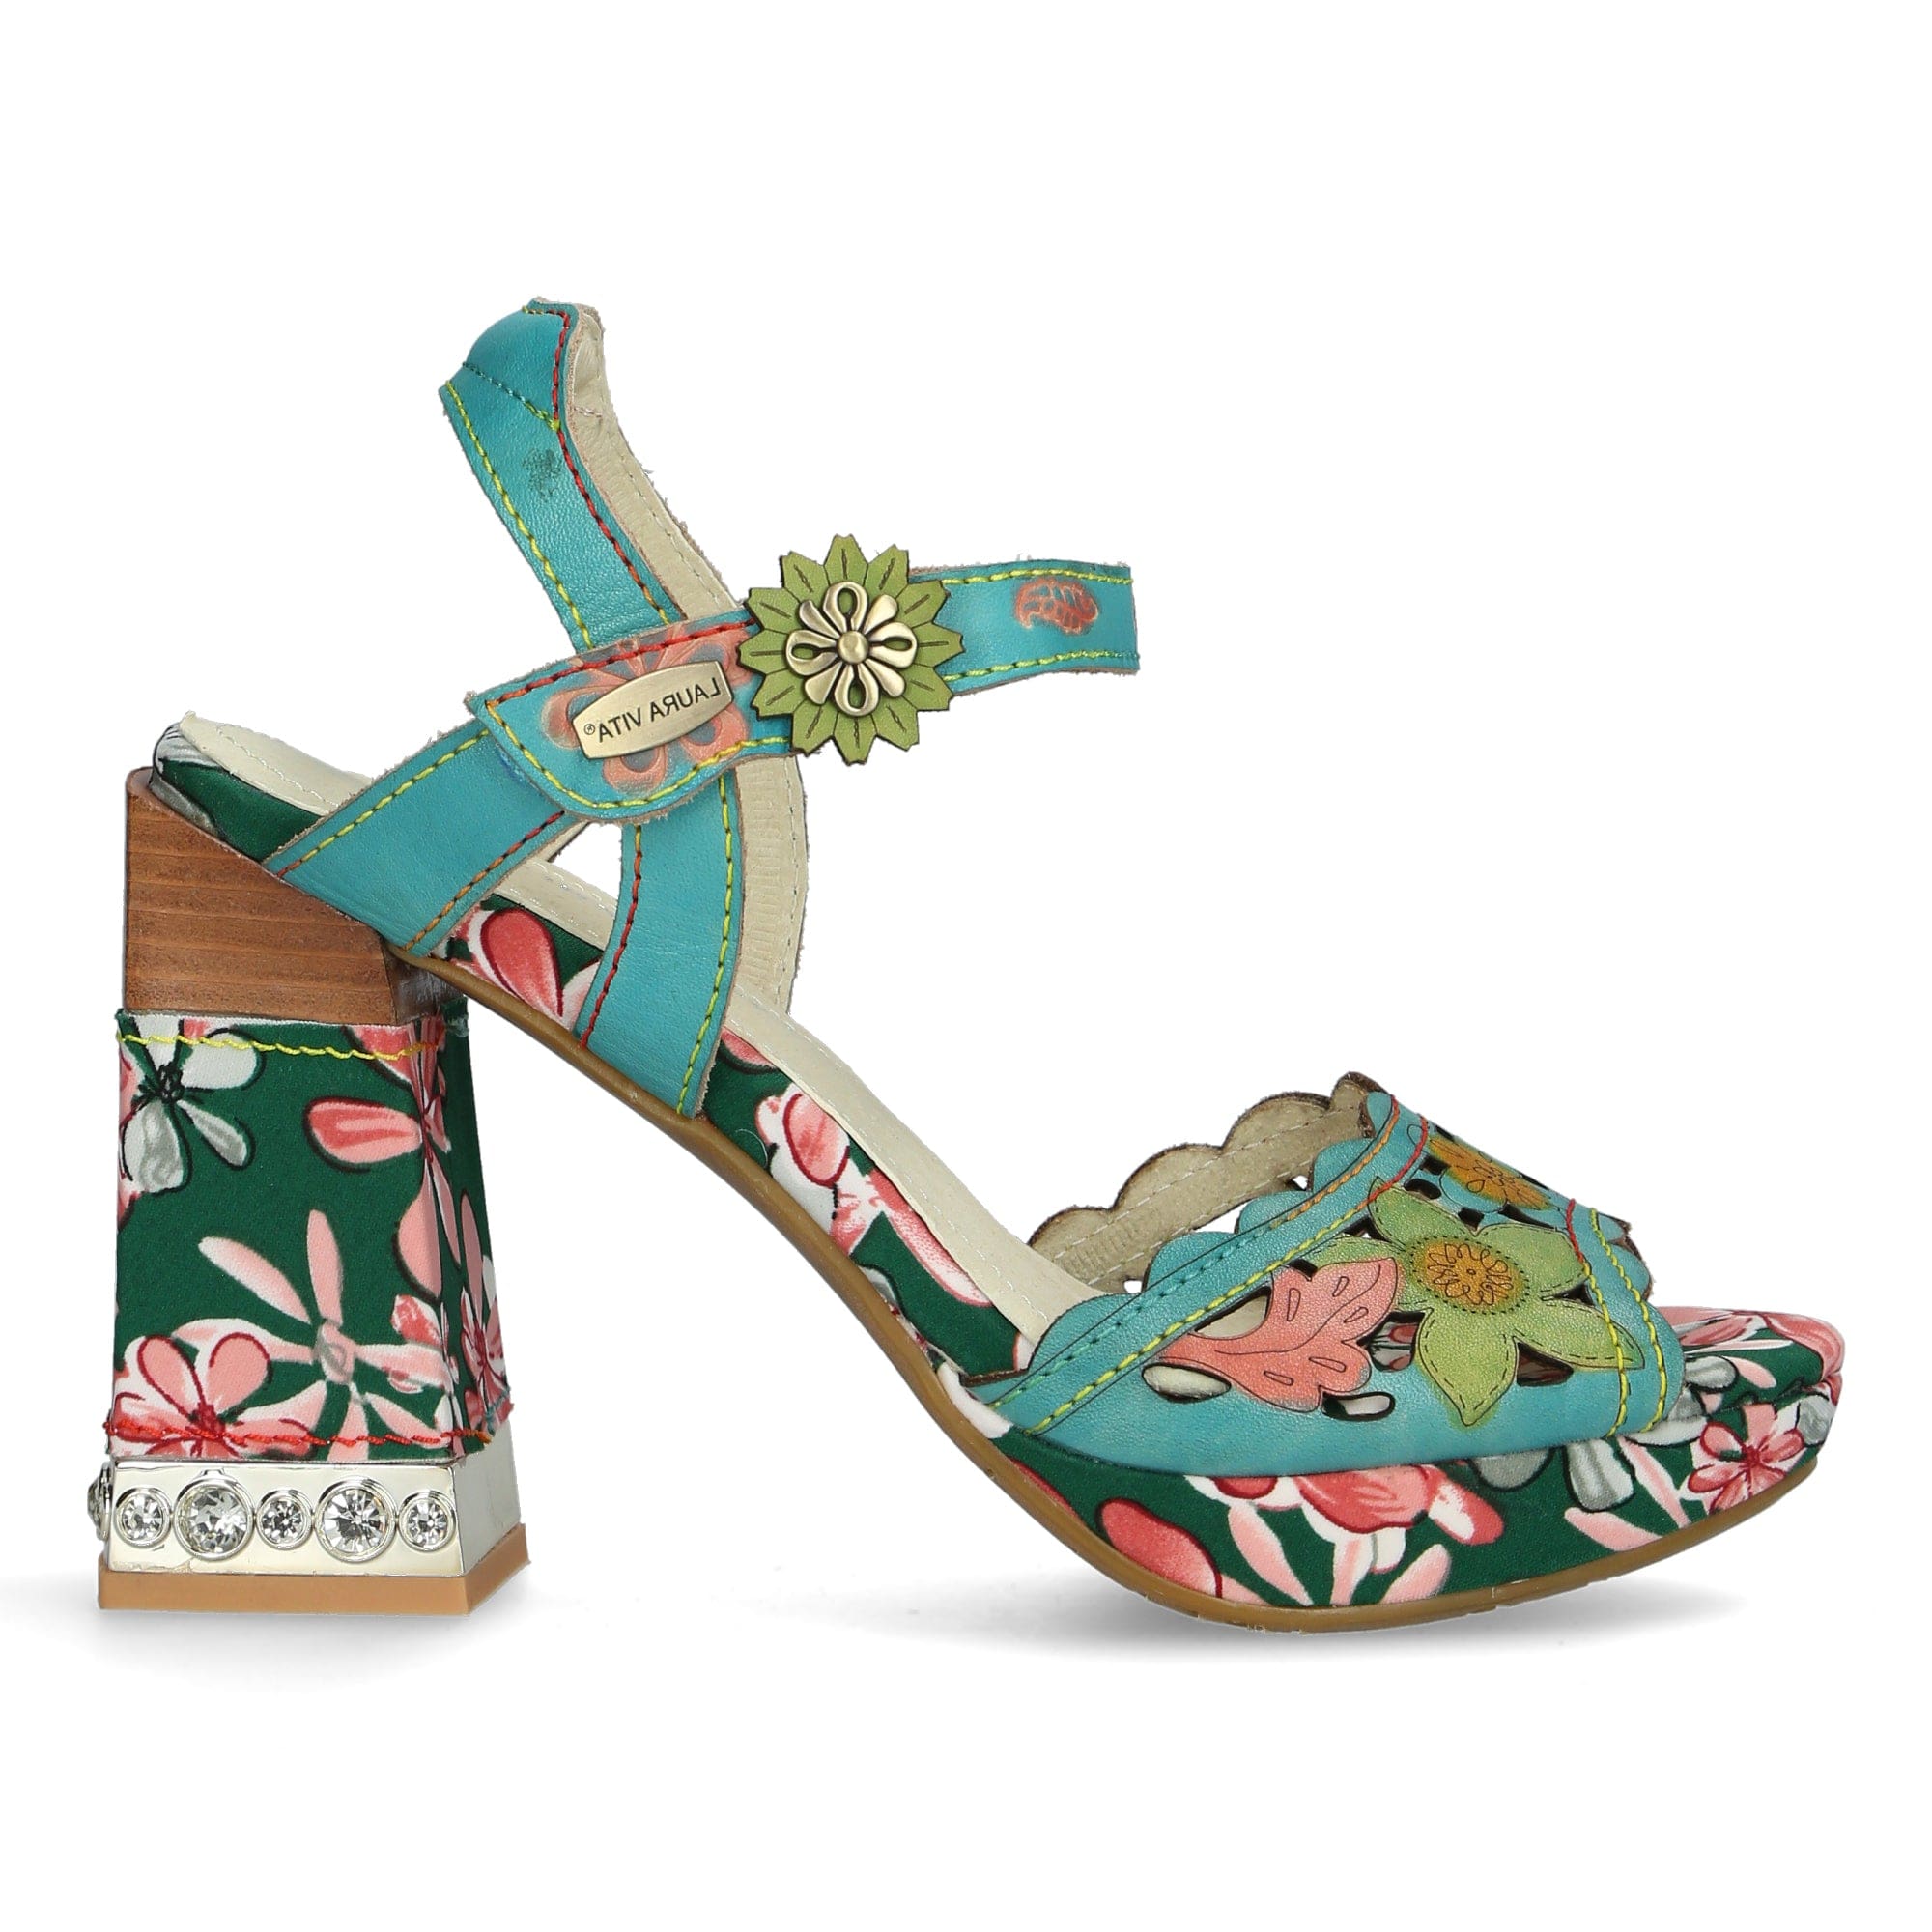 Chaussure NAYAO 01 - 35 / Turquoise - Sandale